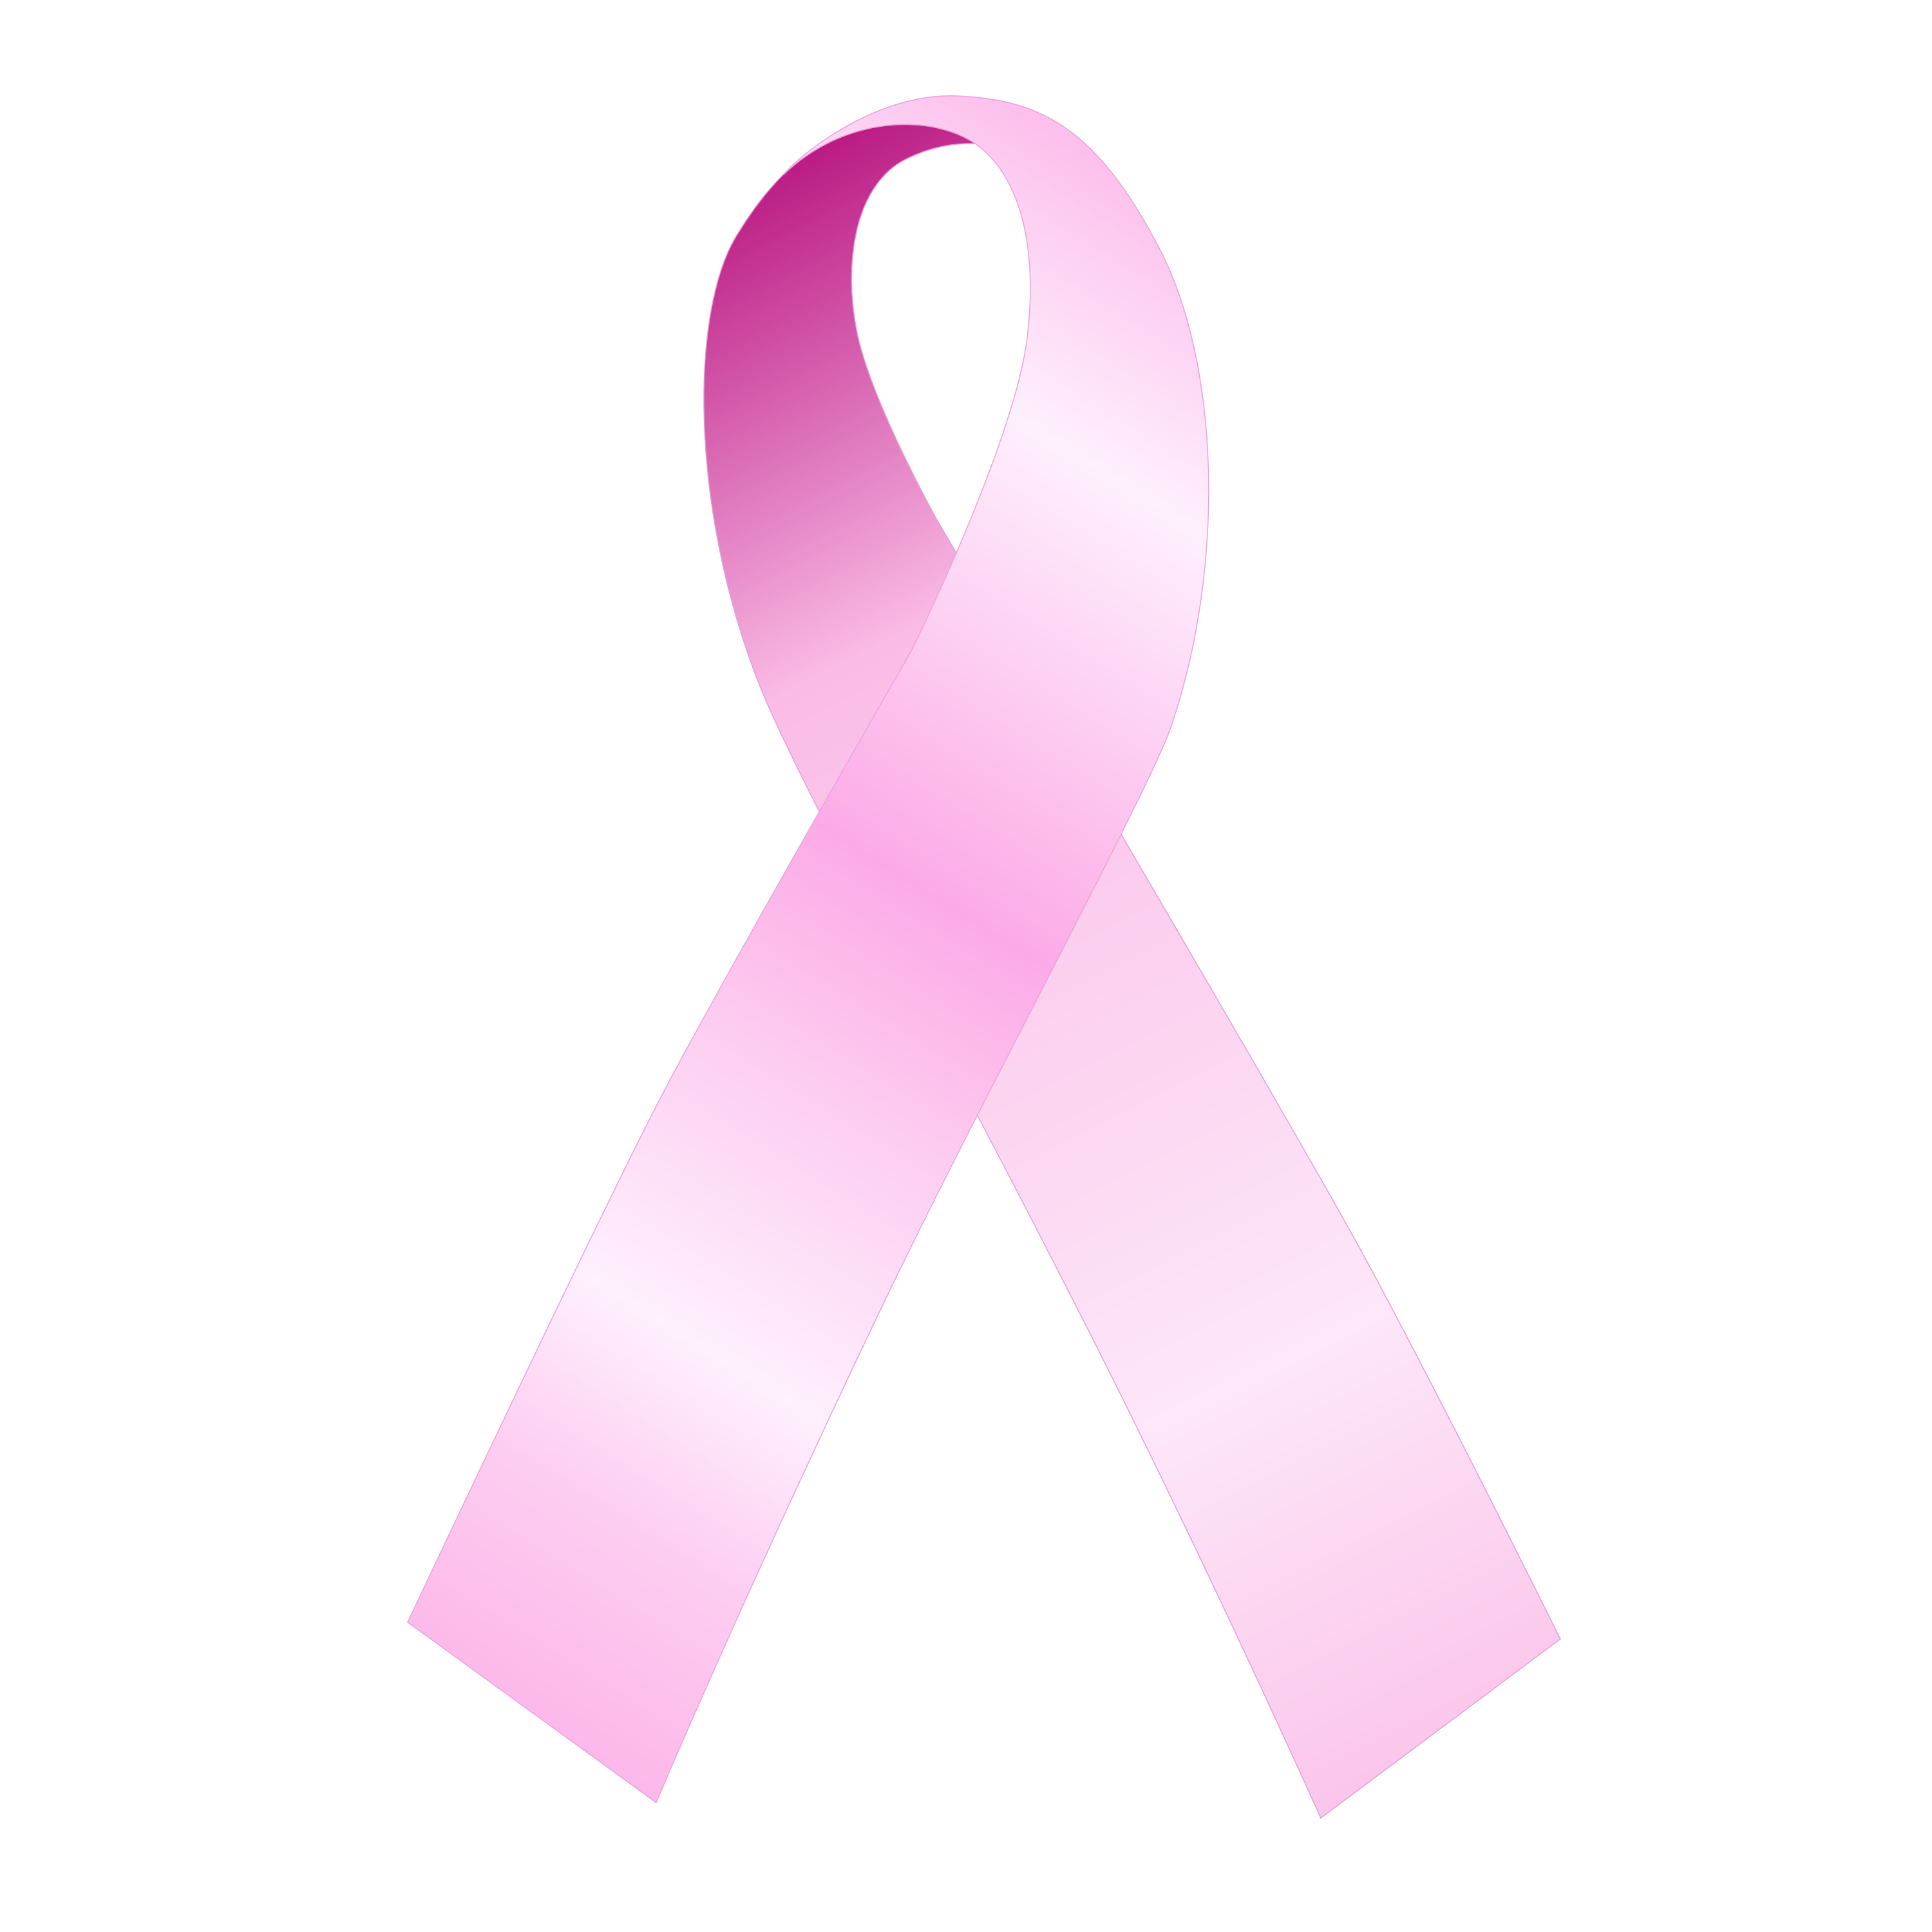 Cancer Ribbon Bow PNG Free Download